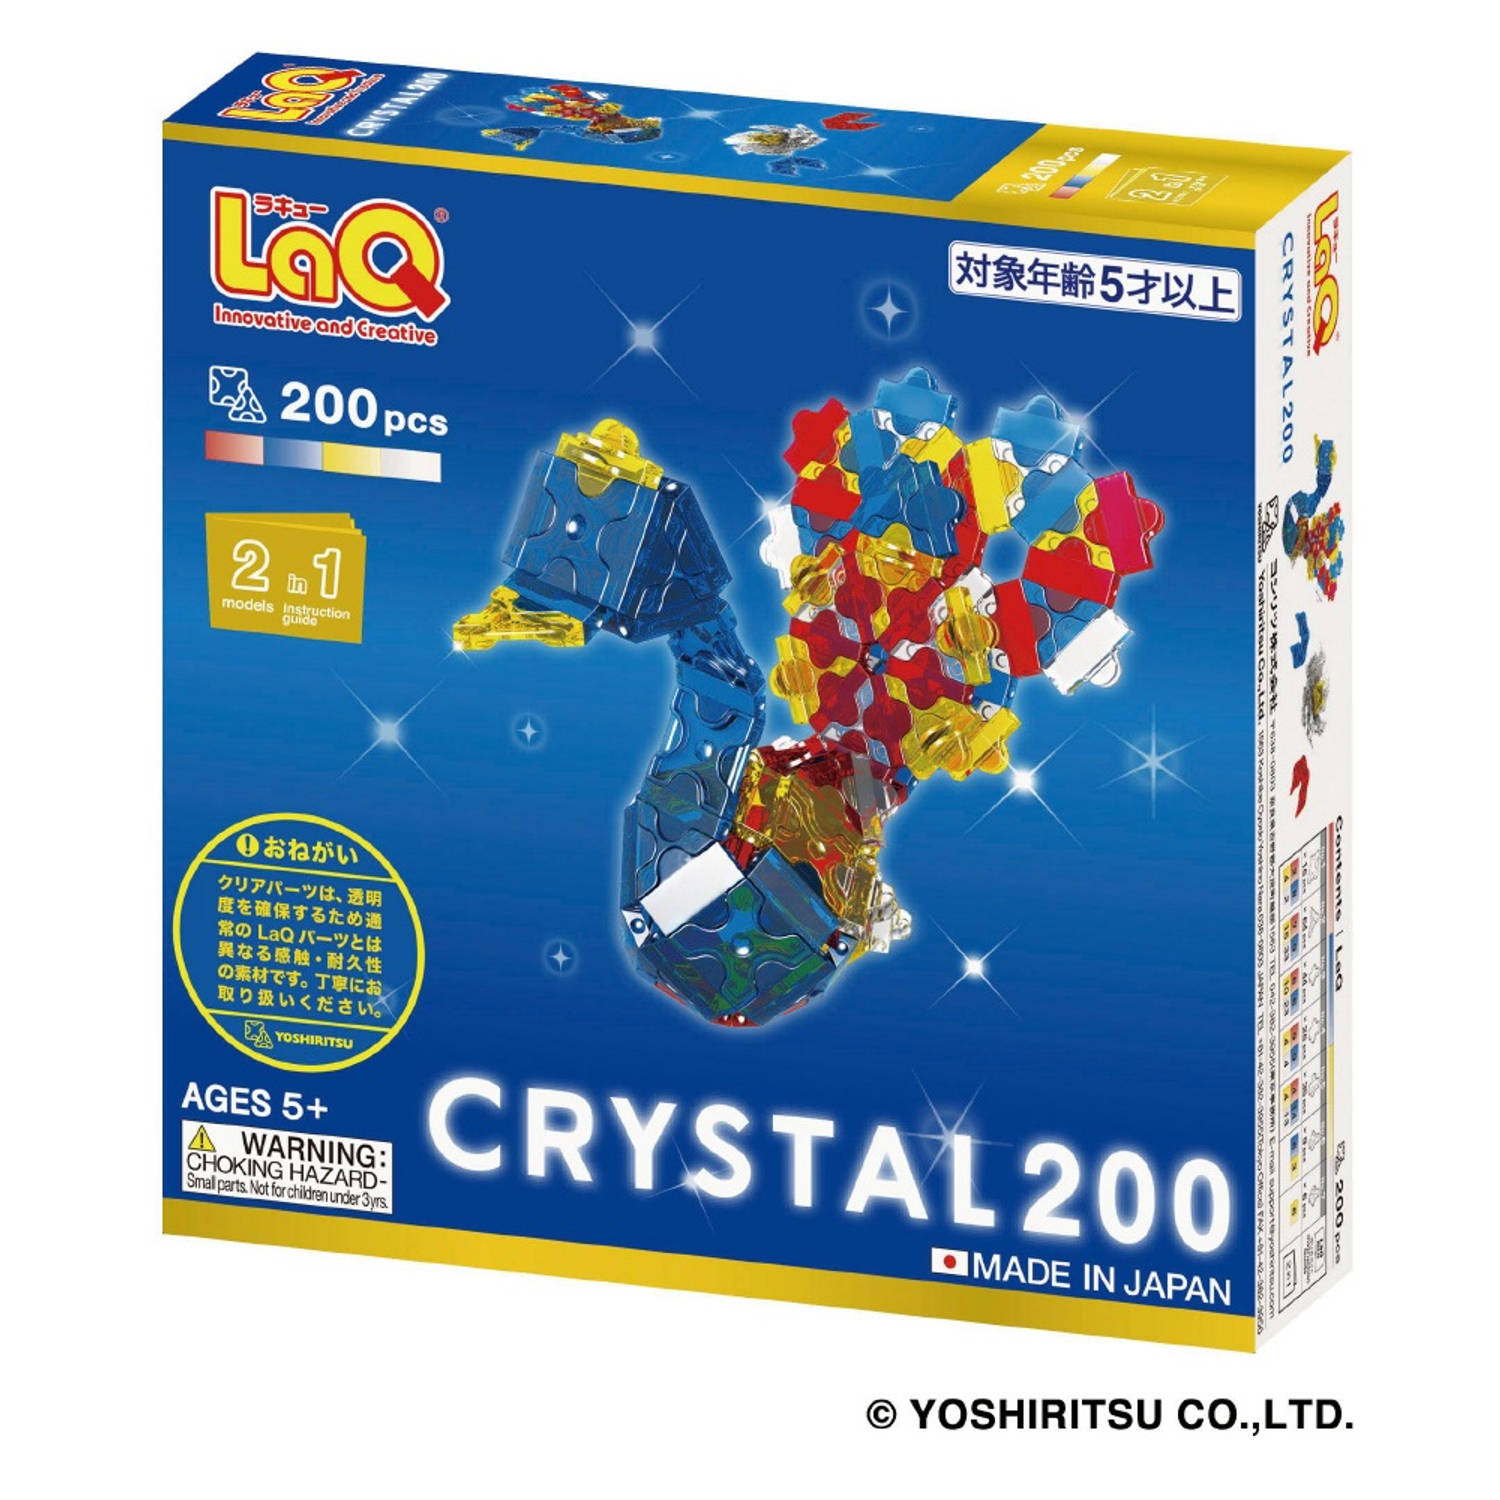 LaQ Free Style CRYSTAL 200